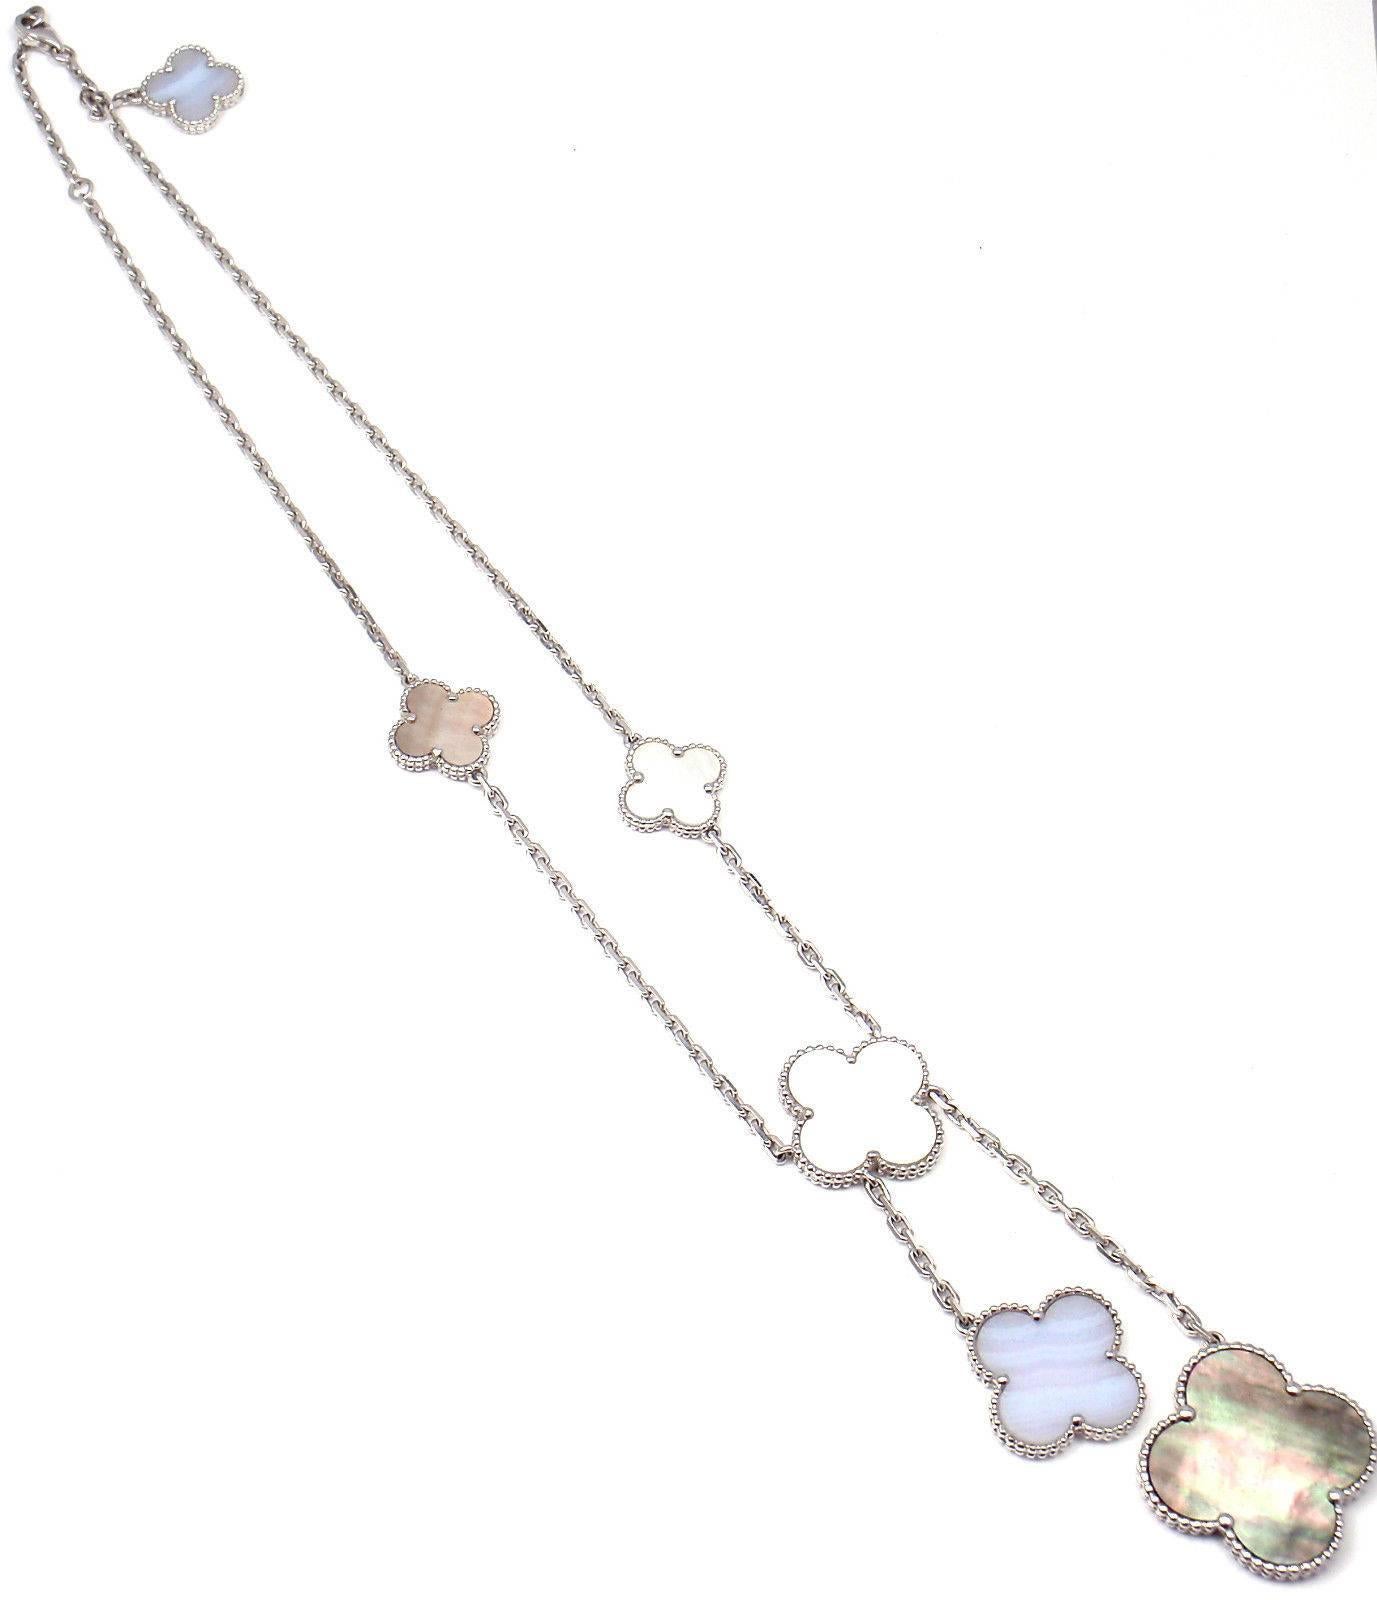 Van Cleef & Arpels Magic Alhambra 18k White Gold 6 Motifs Chalcedony, White & Grey Mother of Pearl Necklace.
With 6 motifs of chalcedony, white & grey mother of pearl magic alhambra
26mm grey mother of pearl, 20 white mother of pearl &